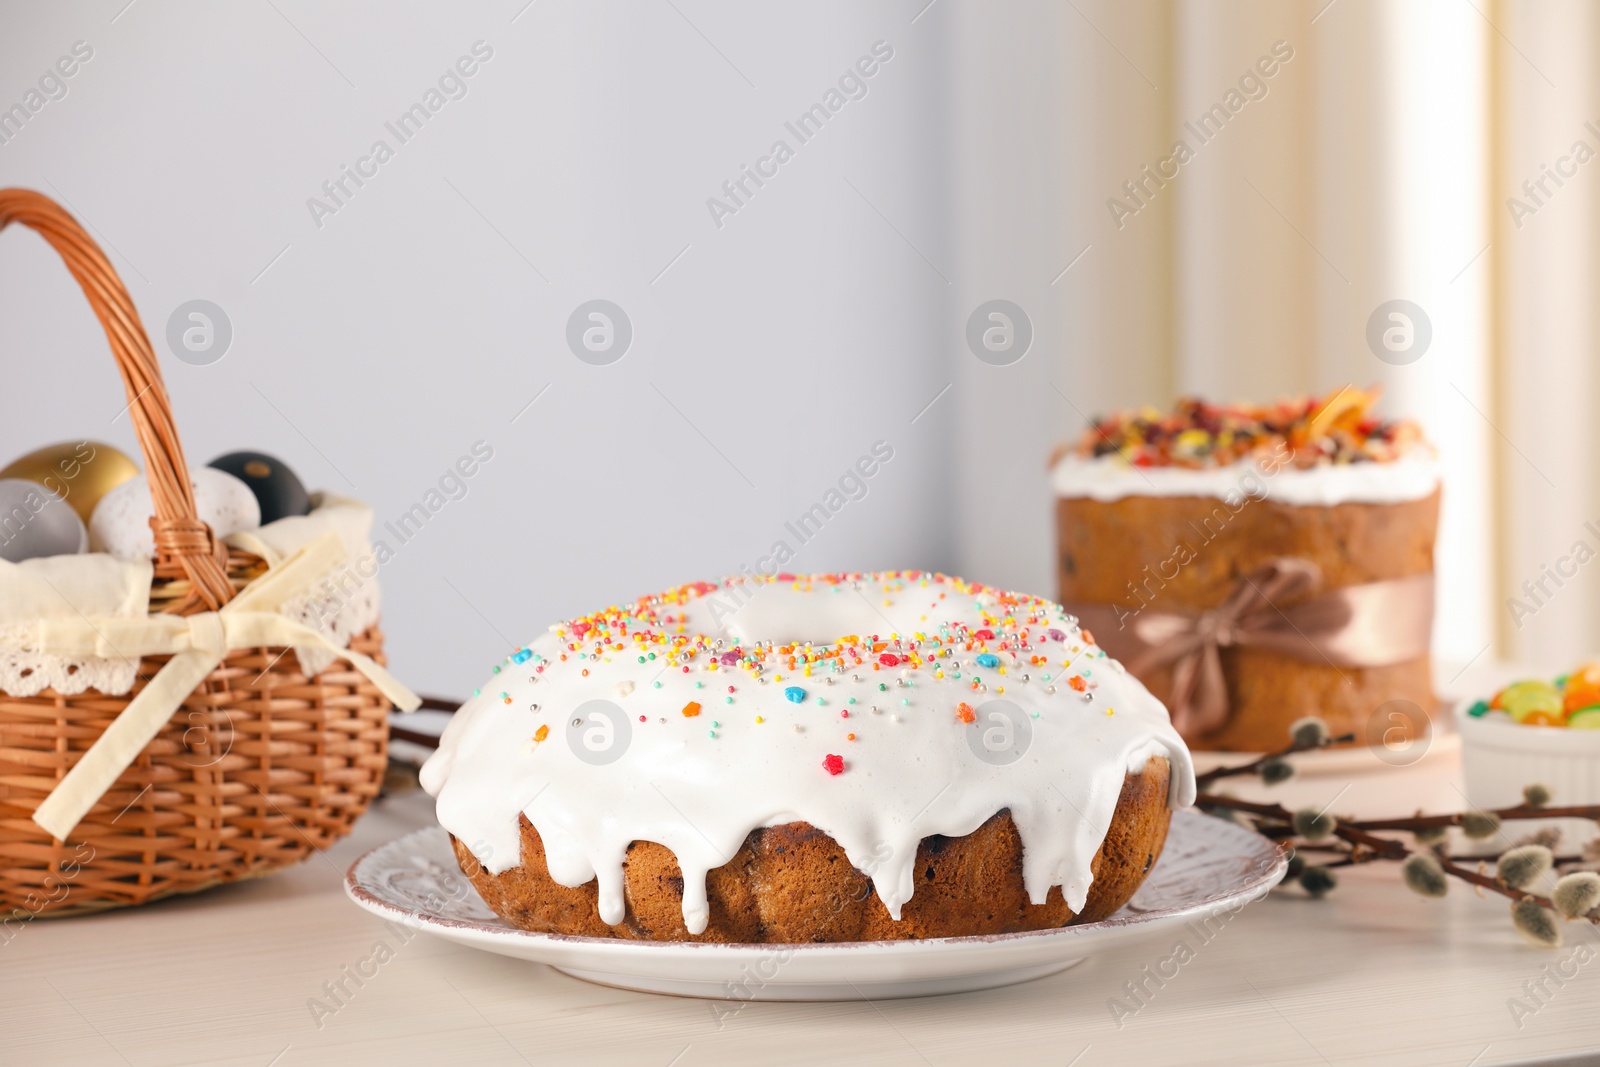 Photo of Delicious Easter cake decorated with sprinkles near willow branches and painted eggs on white wooden table